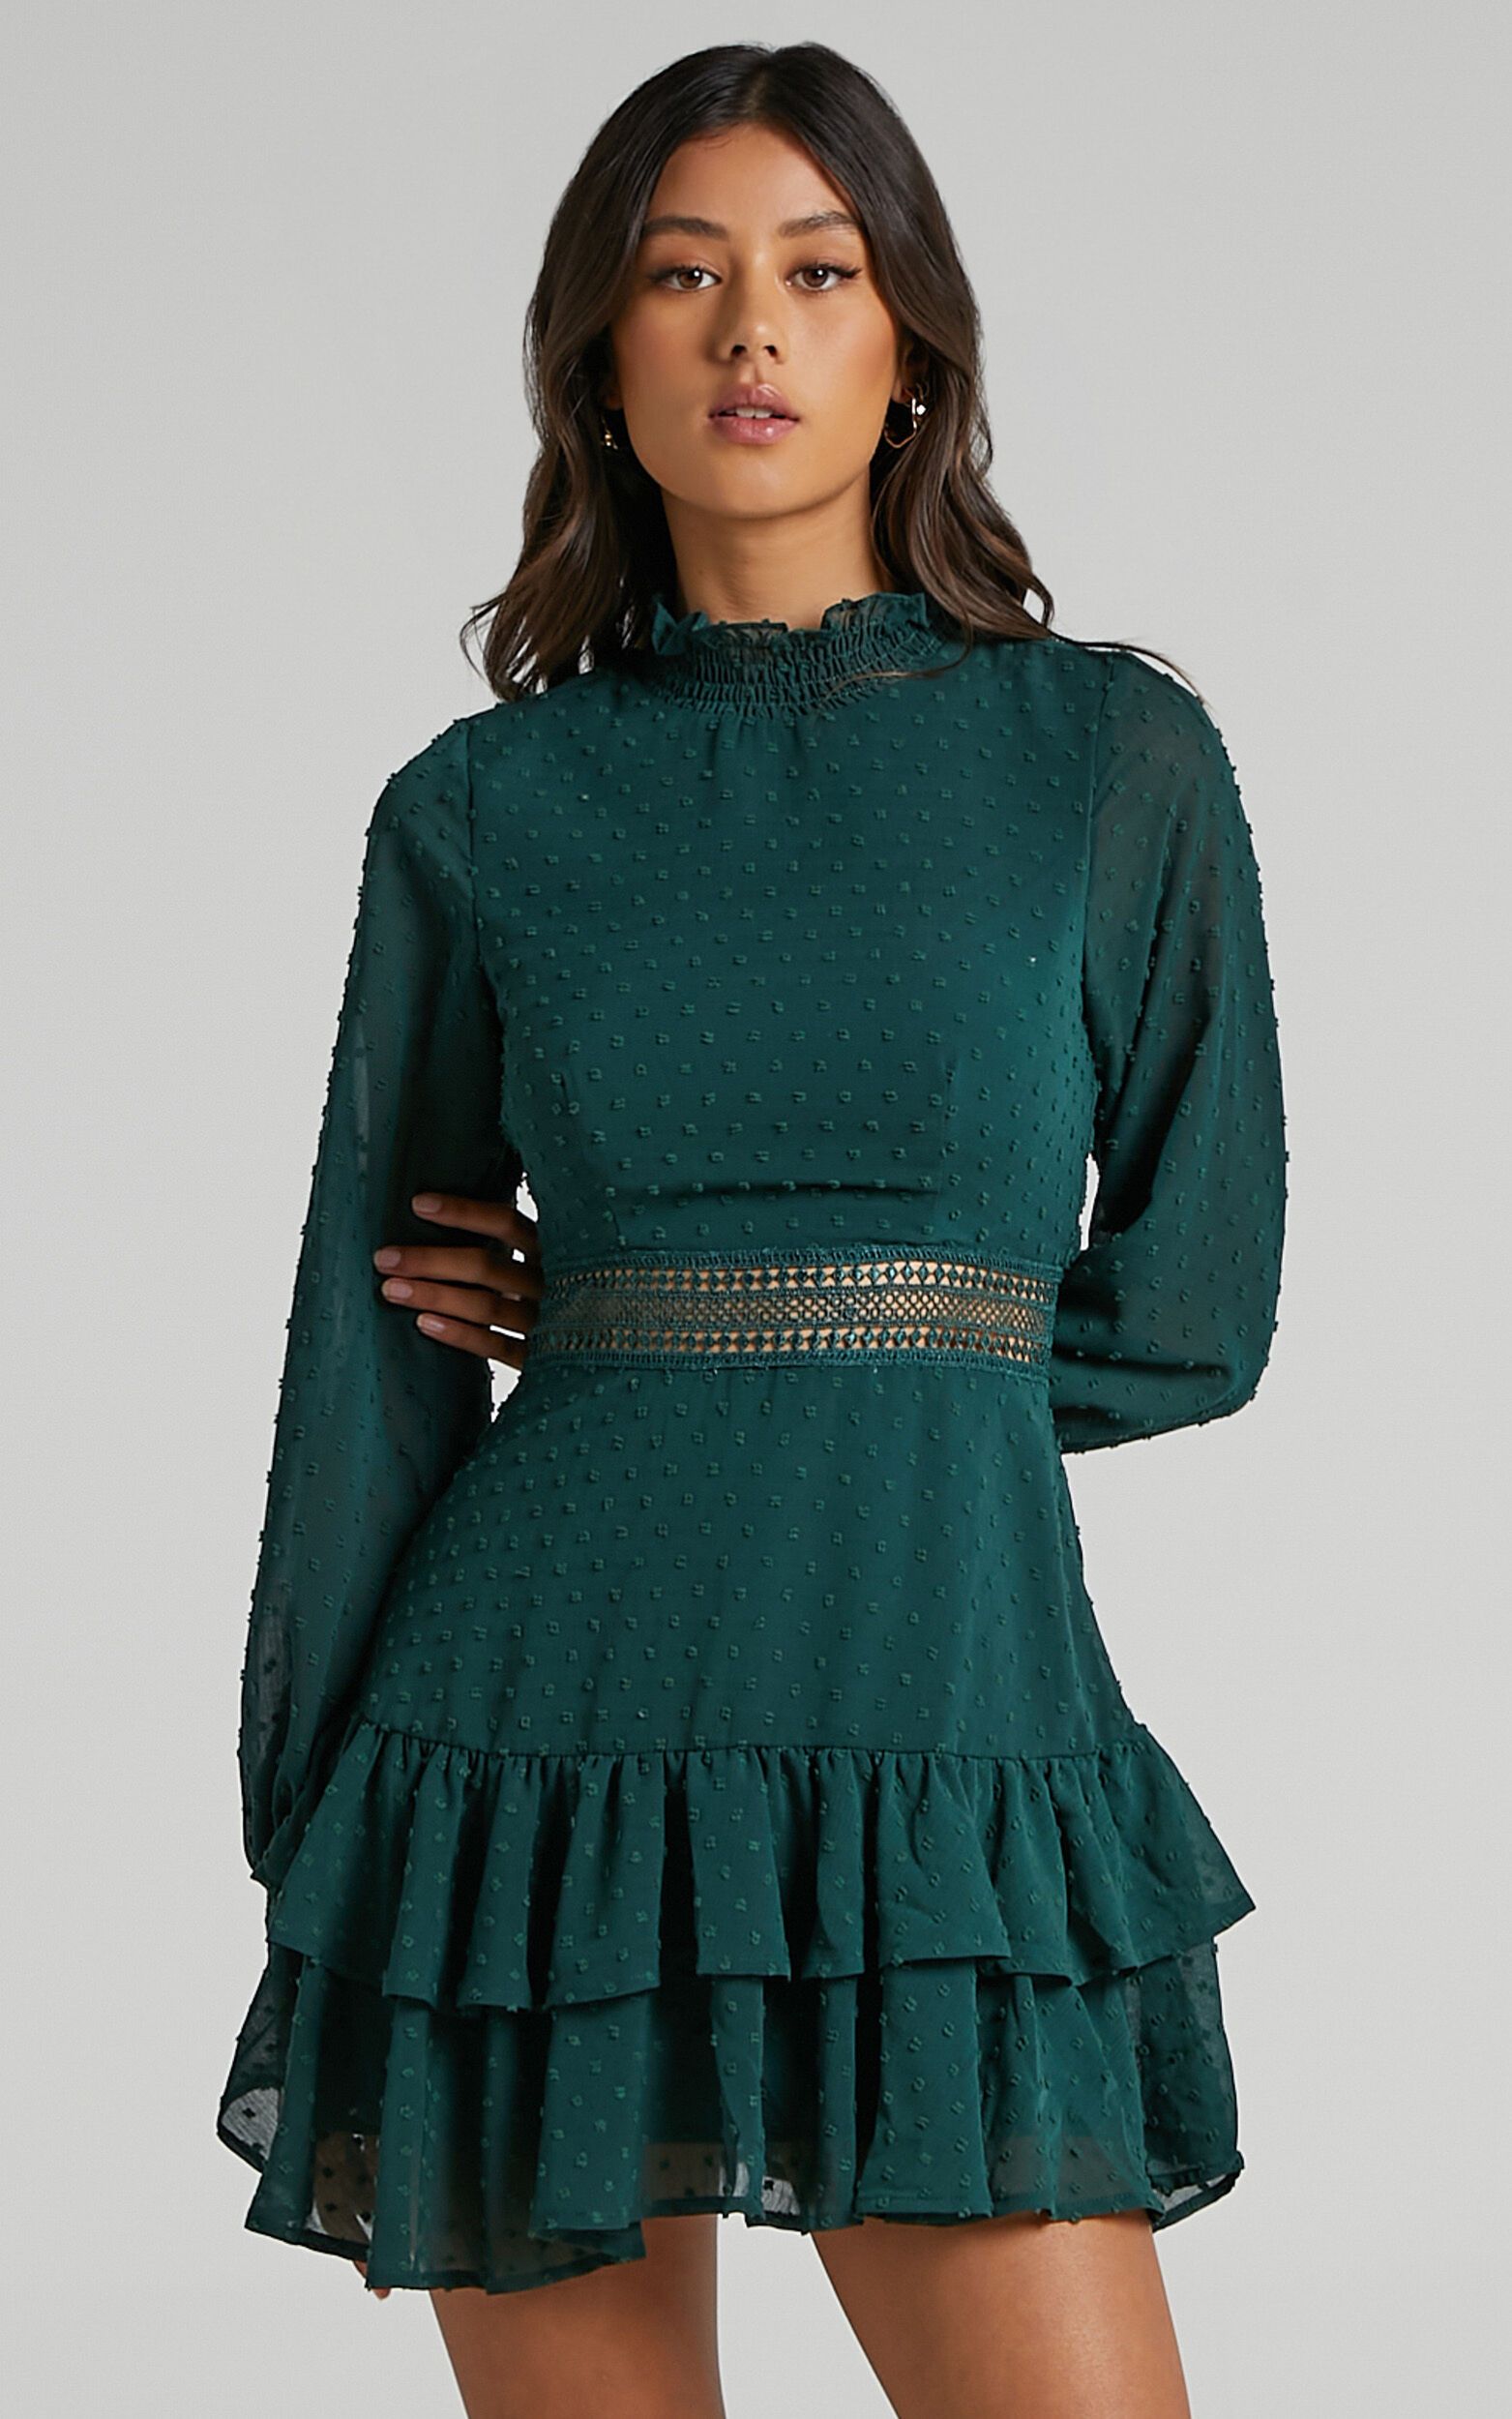 Are You Gonna Kiss Me Long Sleeve Mini Dress in Emerald | Showpo - deactived